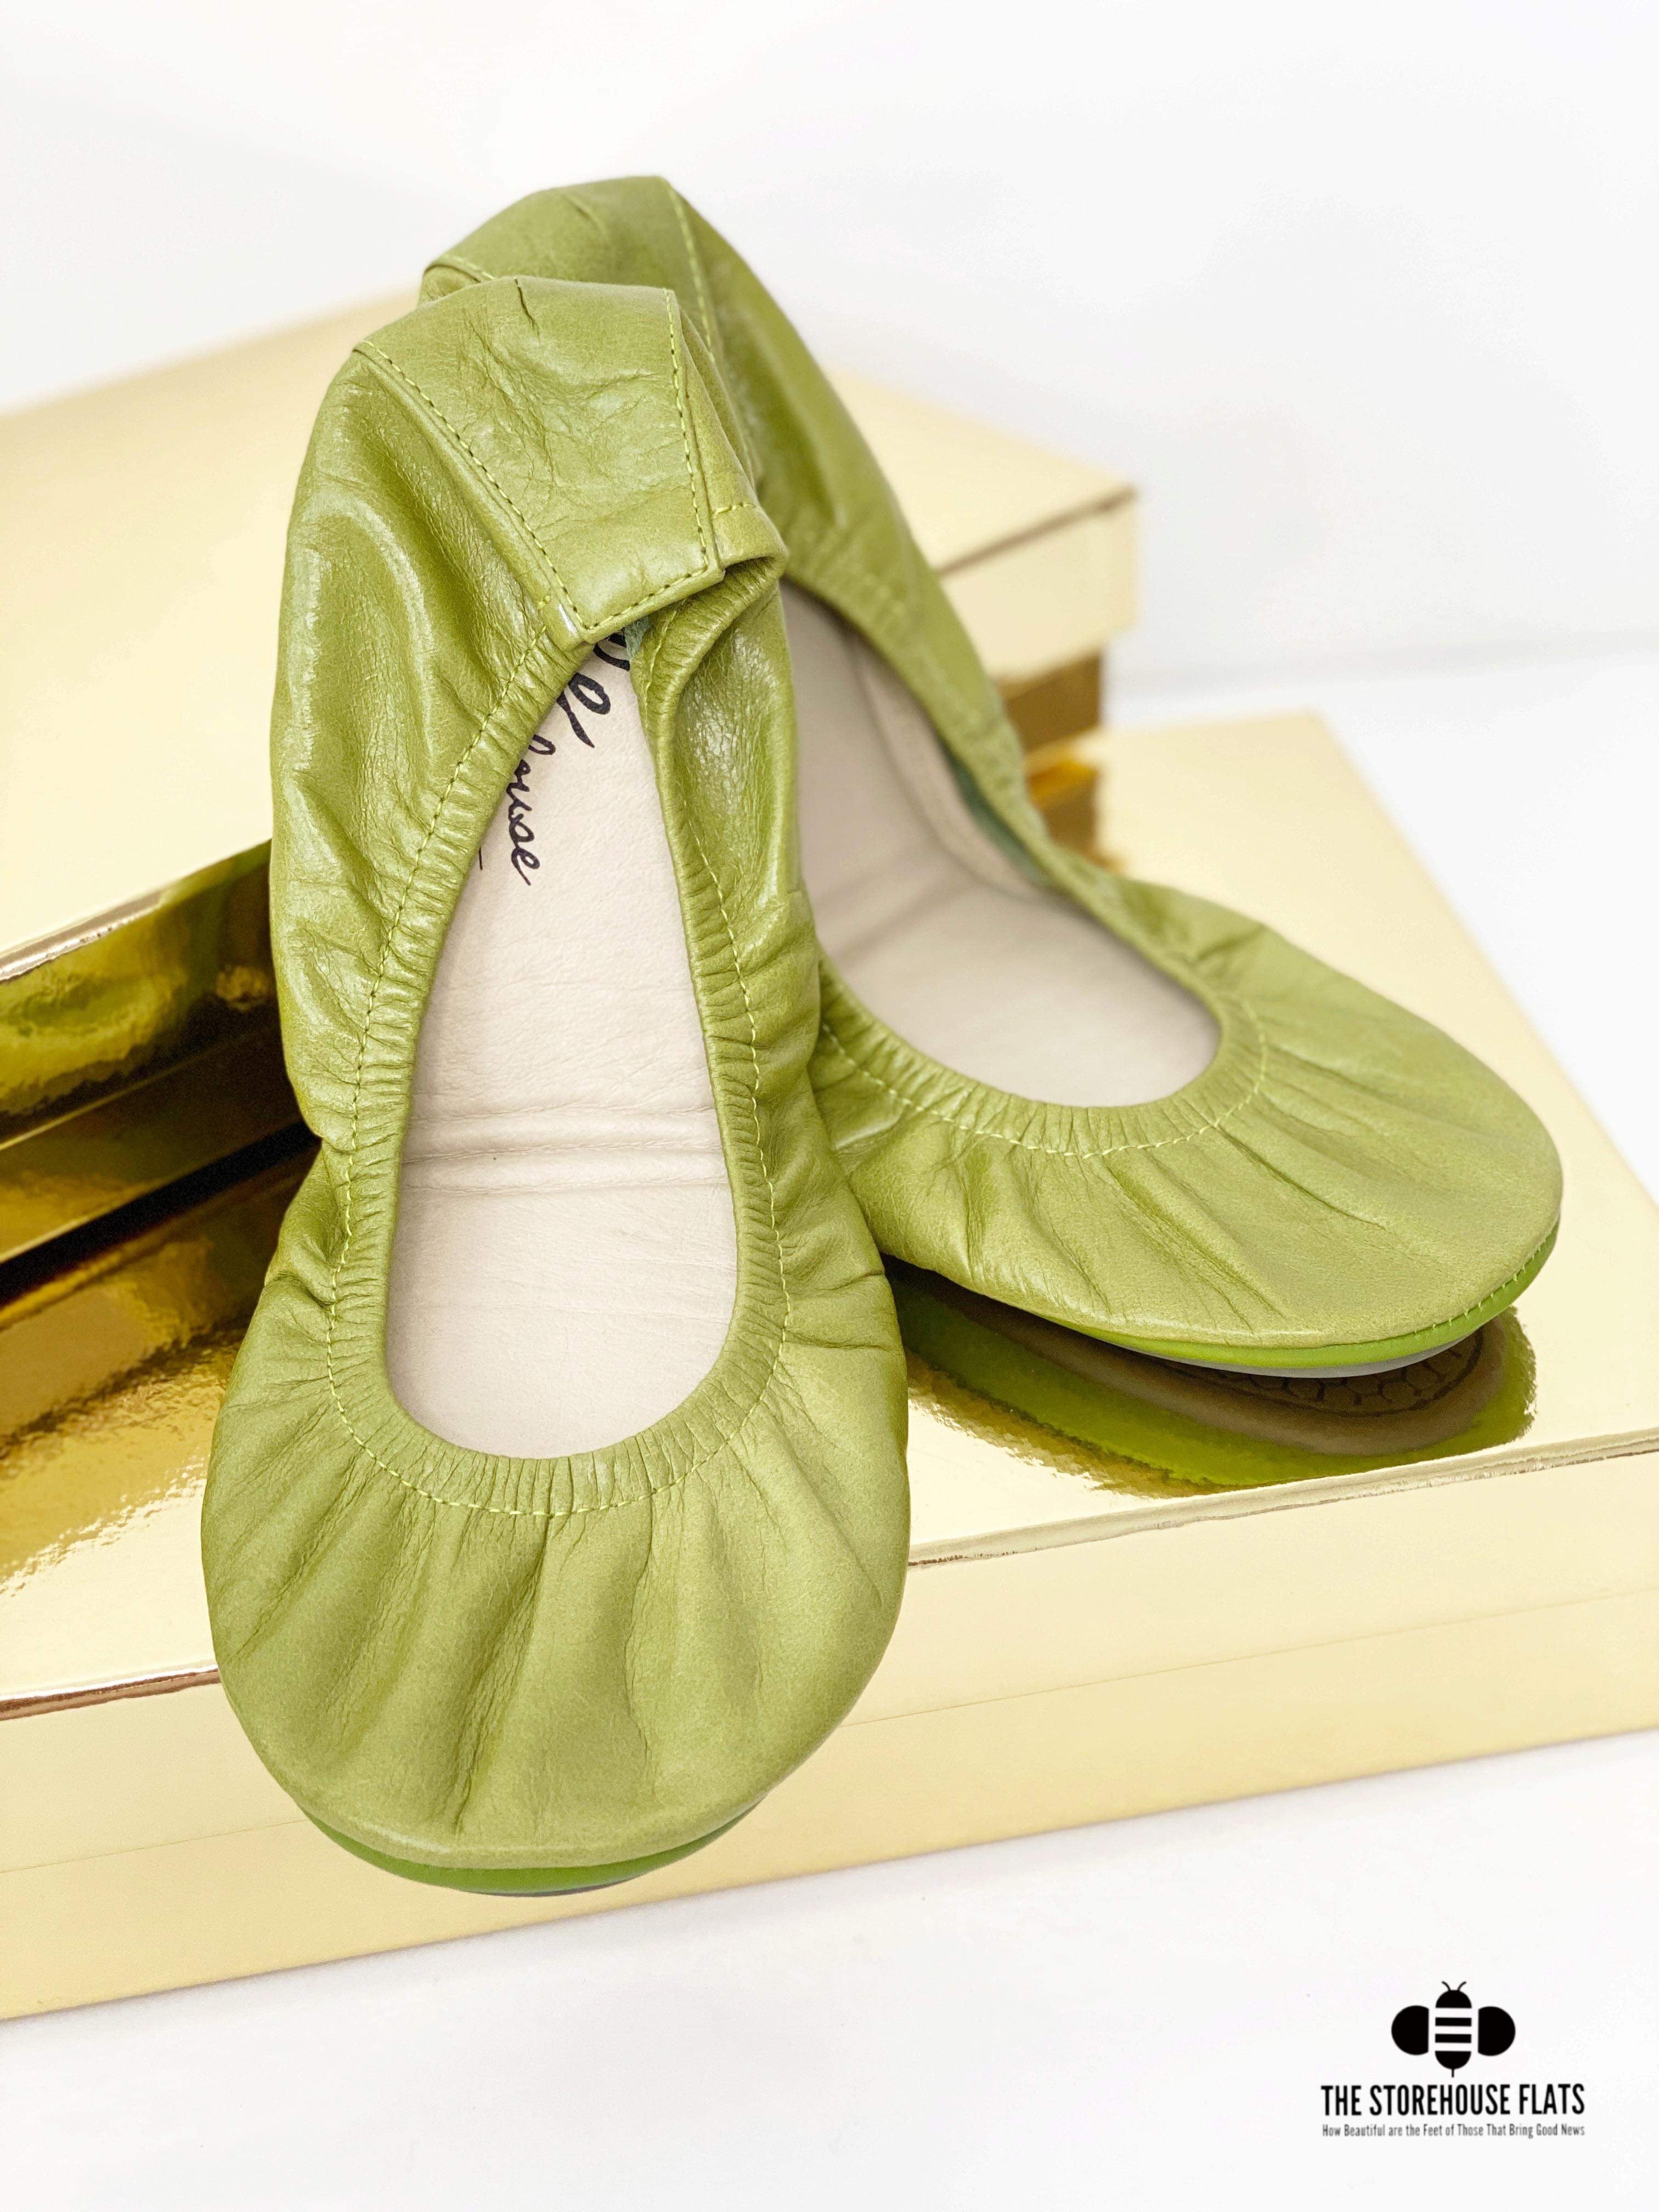 AVOCADO OIL TANNED | IN STOCK - The Storehouse Flats